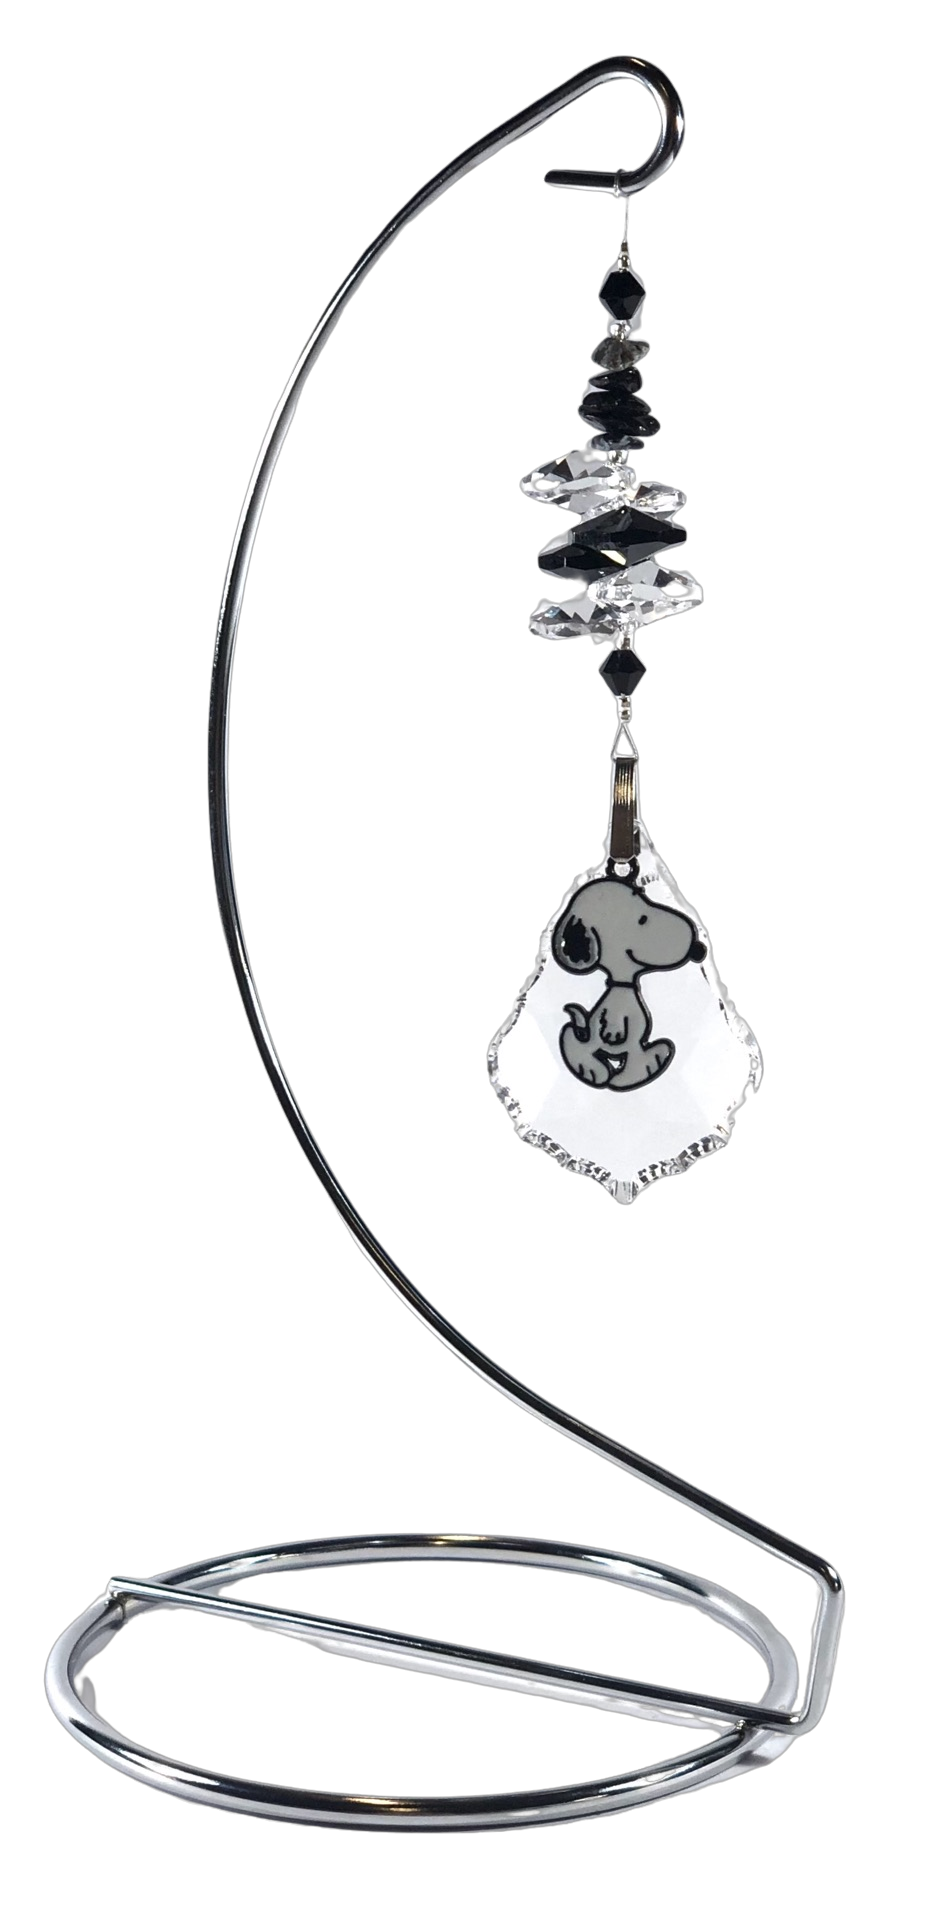 Charlie Brown - Snoopy crystal suncatcher is decorated with snowflake obsidian gemstones and come on this amazing stand.